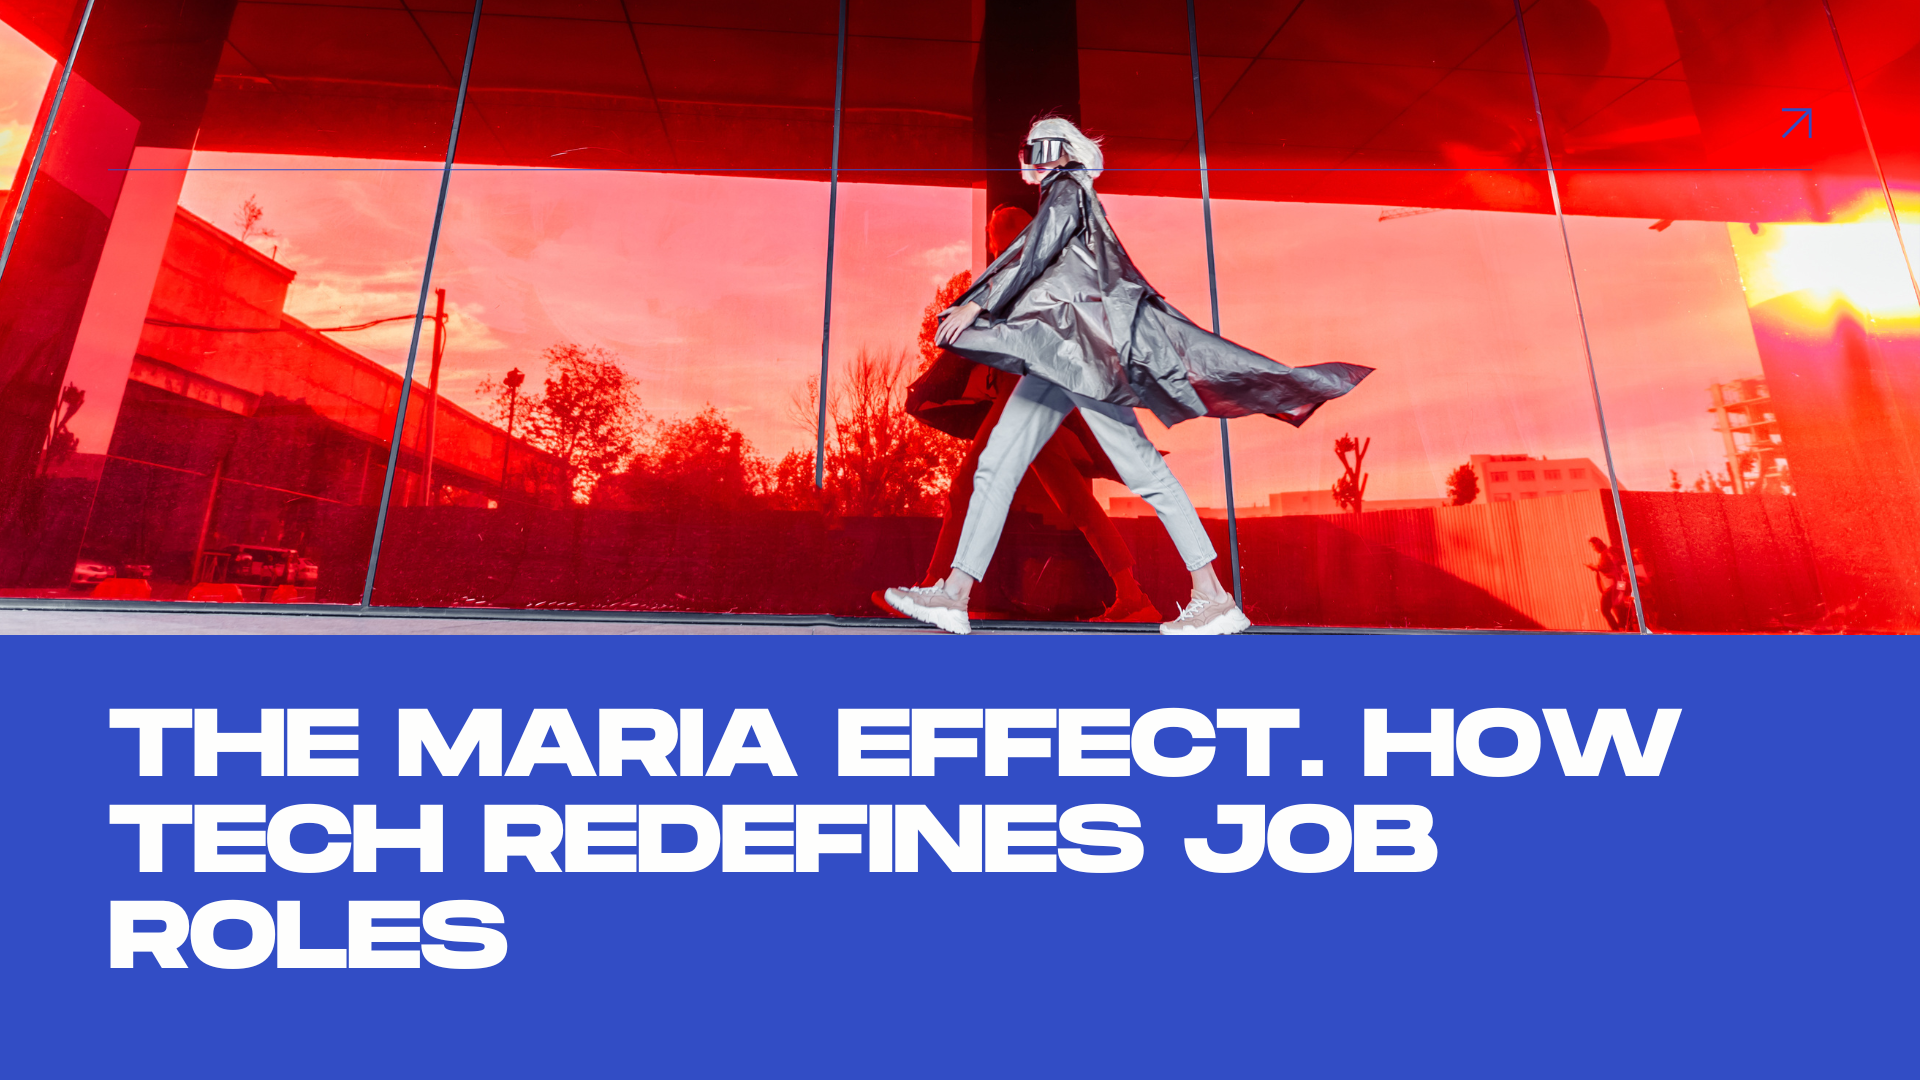 The Maria Effect. How tech redefines job roles.